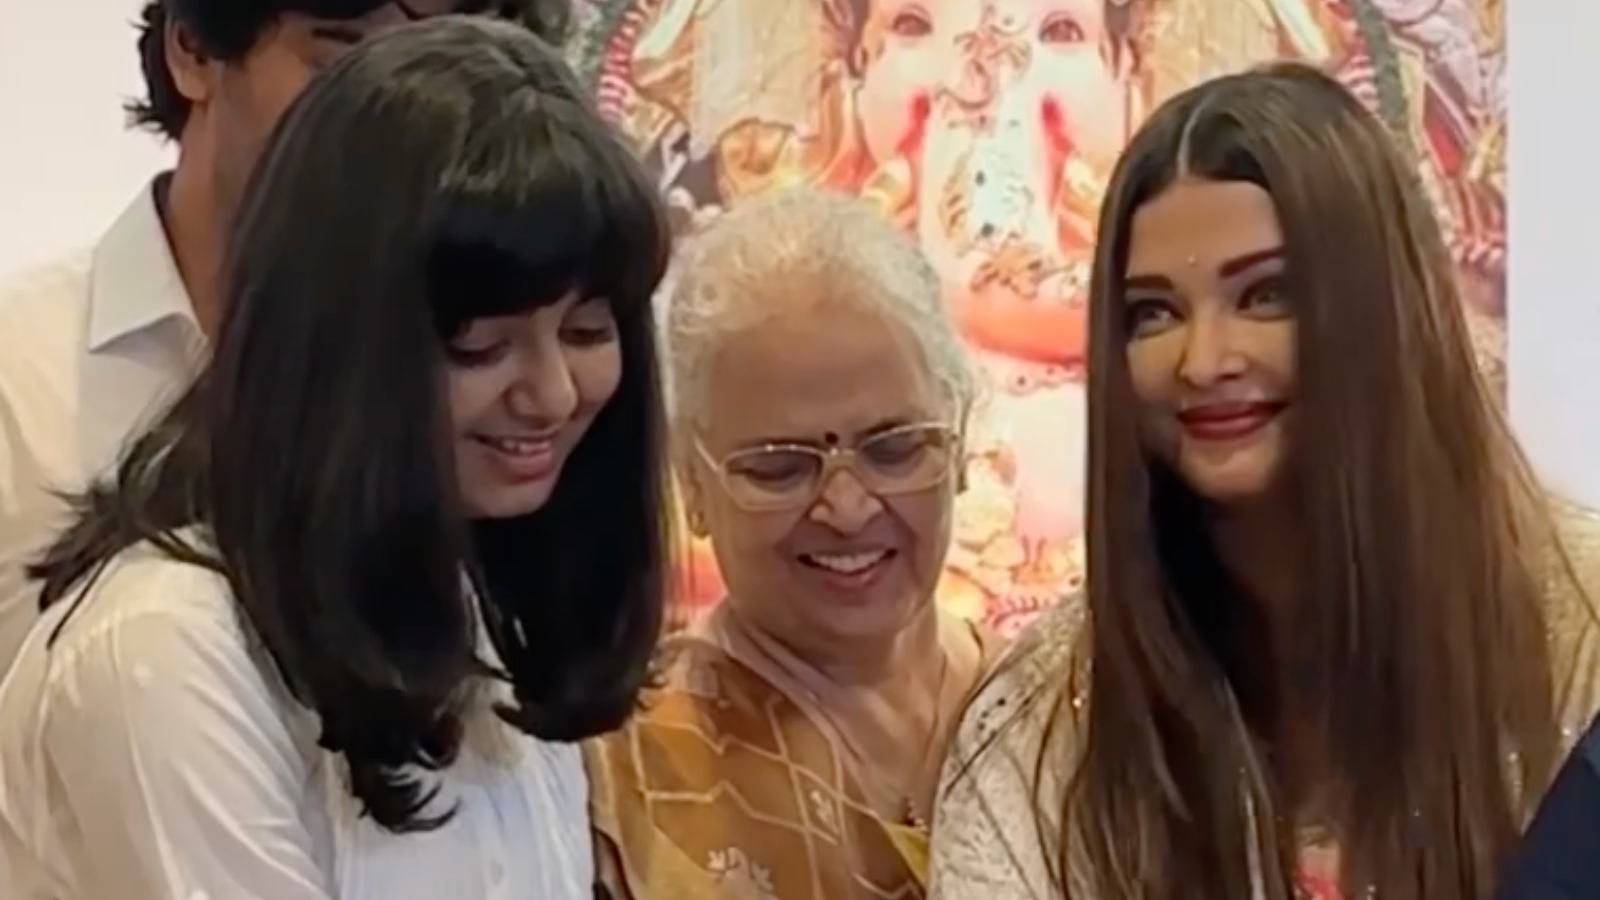 Aishwarya Rai cuts birthday cake at an event with daughter Aaradhya  Bachchan, refuses to eat as she is observing Karva Chauth. Watch video |  Bollywood News - The Indian Express